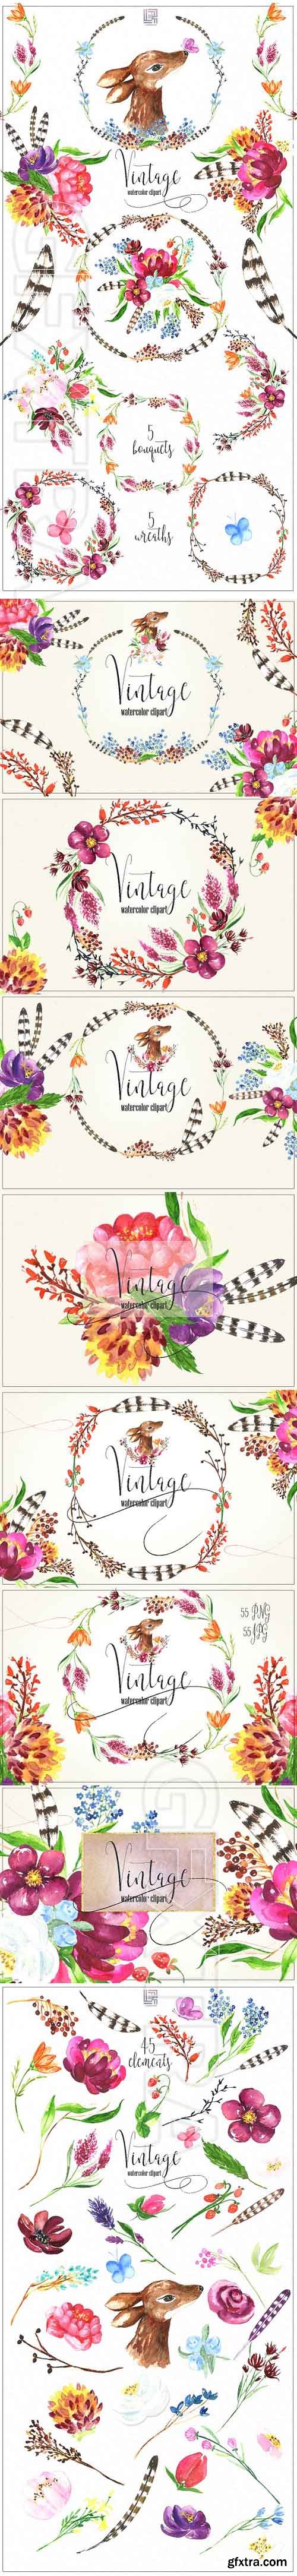 CreativeMarket - Vintage forest Watercolor clipart 1756416